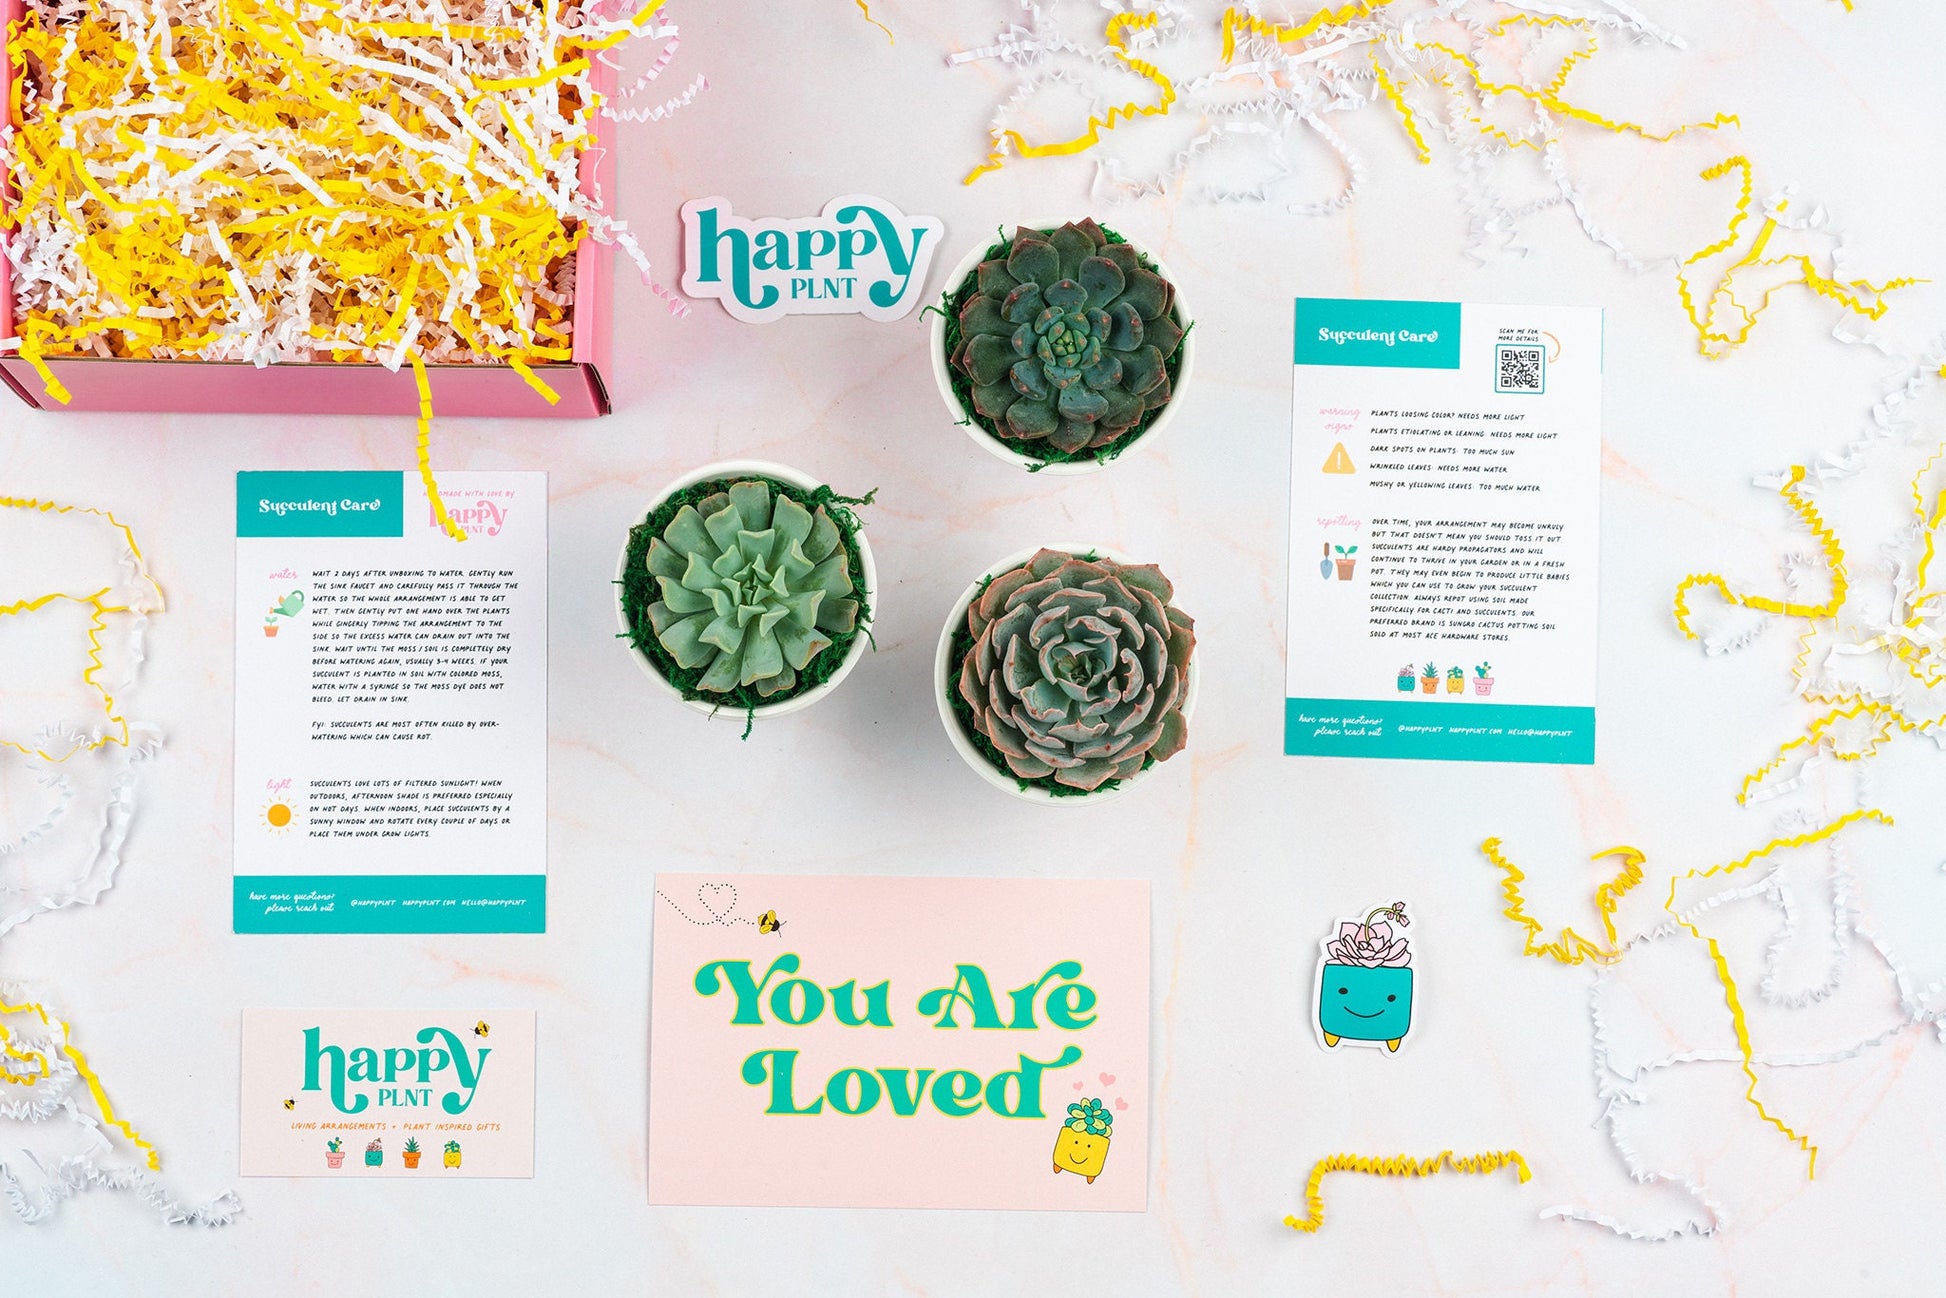 I love you! Robot Succulent Gift Box | 3 Living Succulent Pots + Personalized Greeting Card, Valentines Day Gift, Romantic Gift